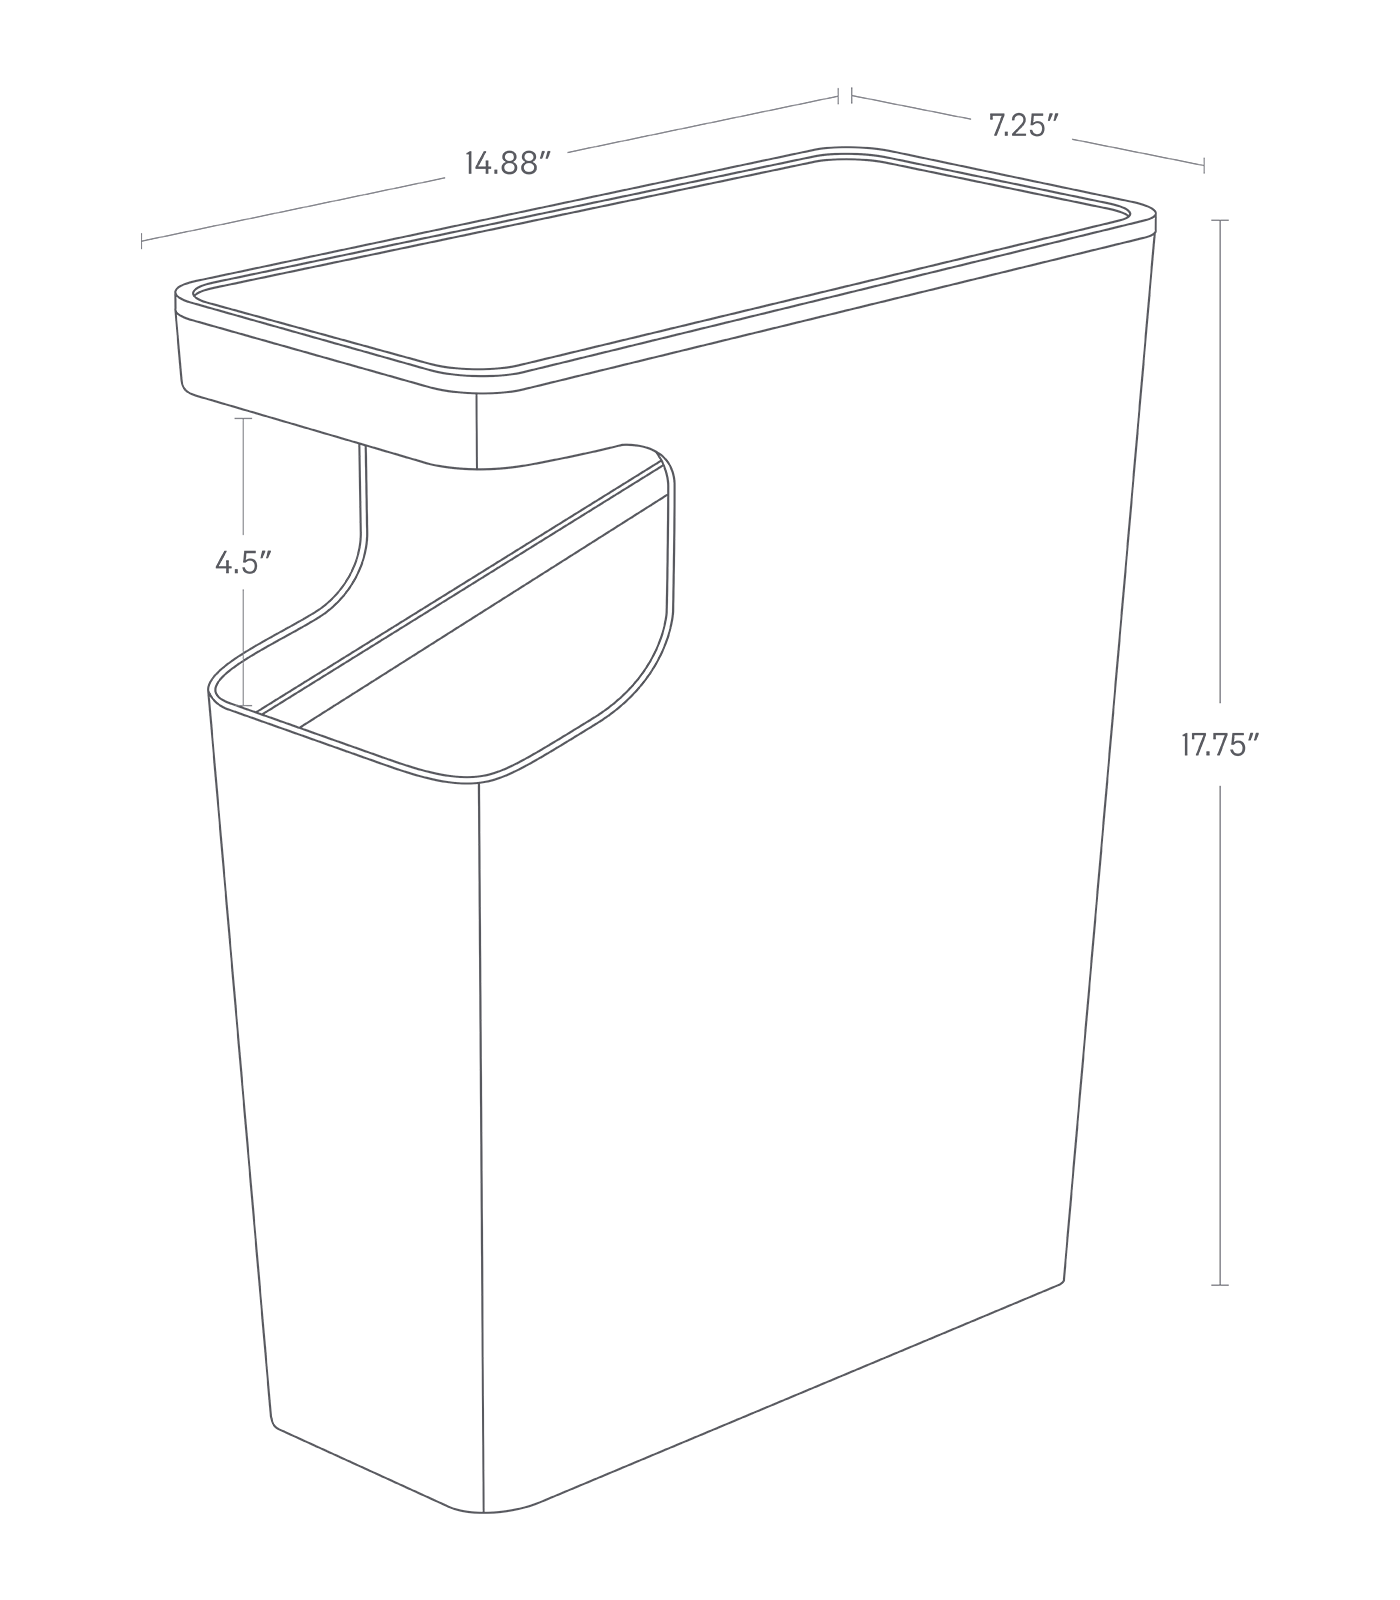 Dimension image for Side Table Trash Can showing length of 14.88